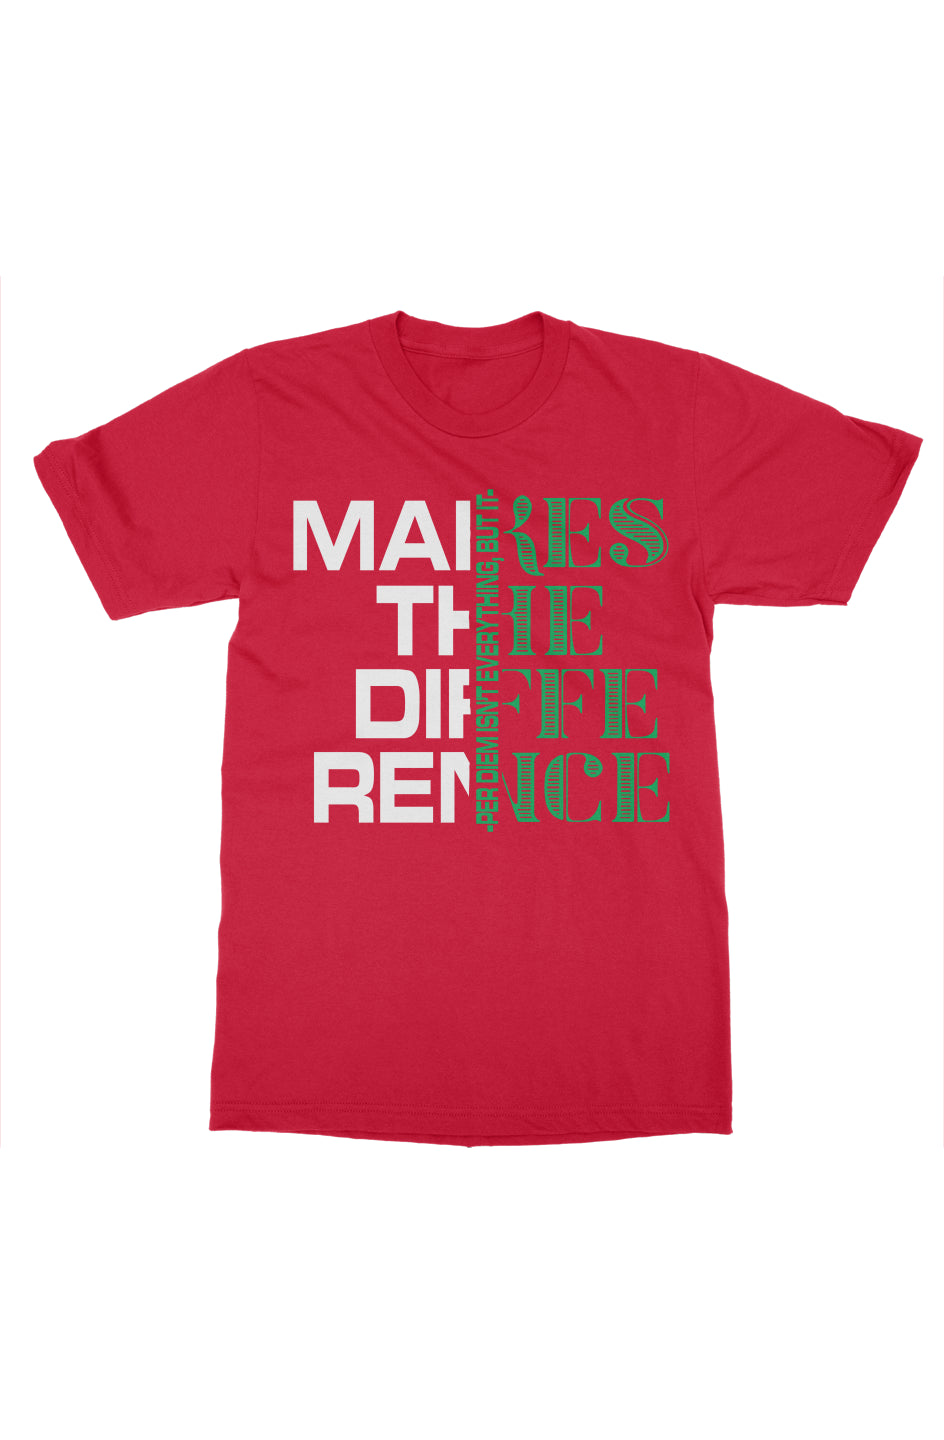 Per Diem Makes The Difference Tee- Red